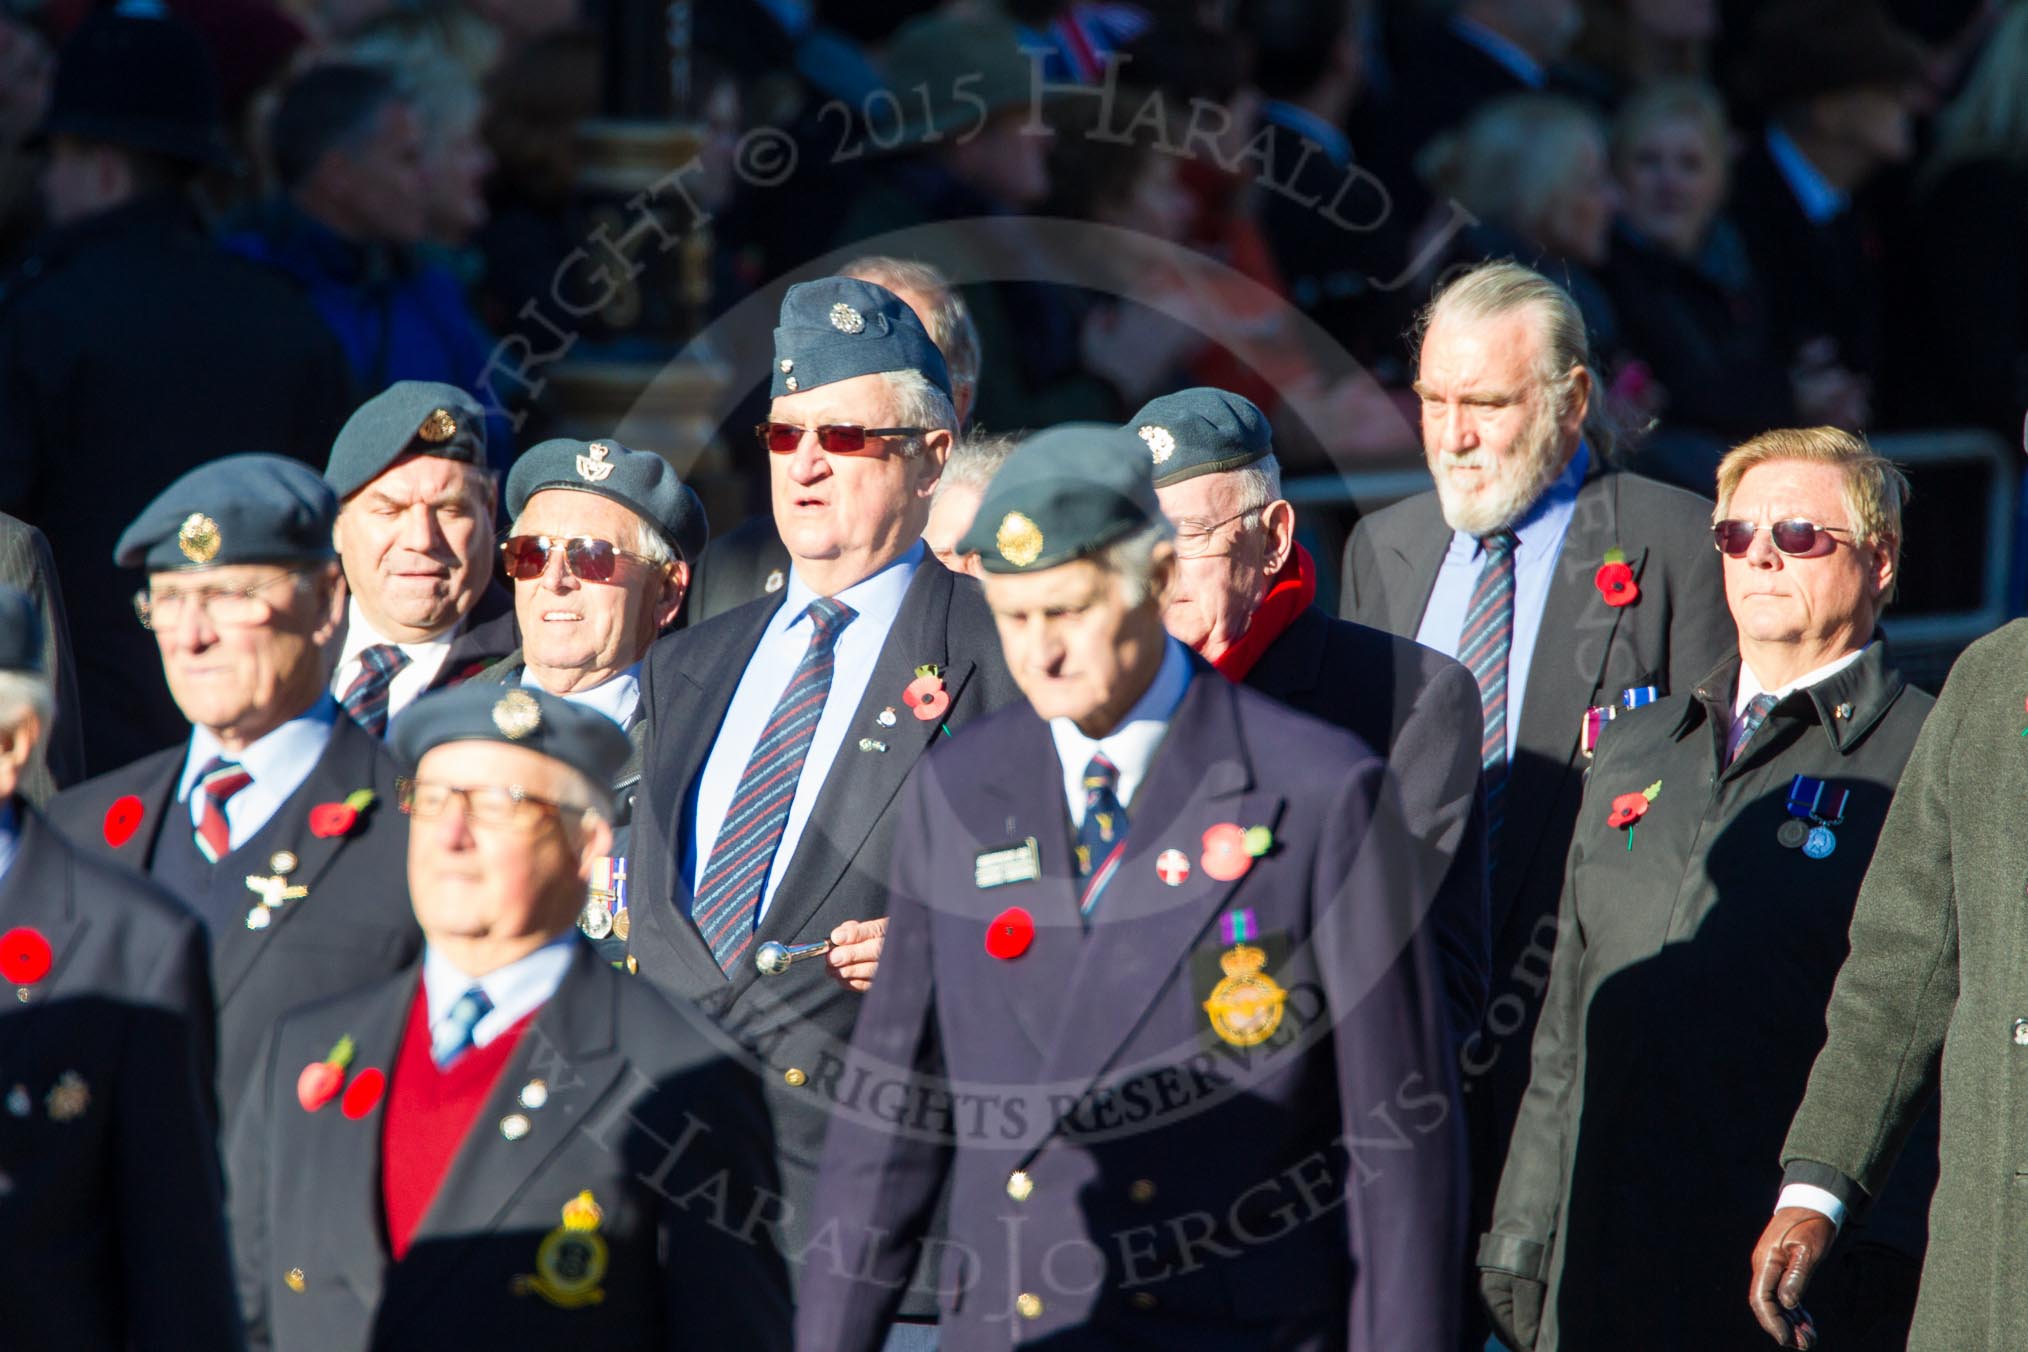 Remembrance Sunday Cenotaph March Past 2013: C10 - National Service (Royal Air Force) Association..
Press stand opposite the Foreign Office building, Whitehall, London SW1,
London,
Greater London,
United Kingdom,
on 10 November 2013 at 12:07, image #1773